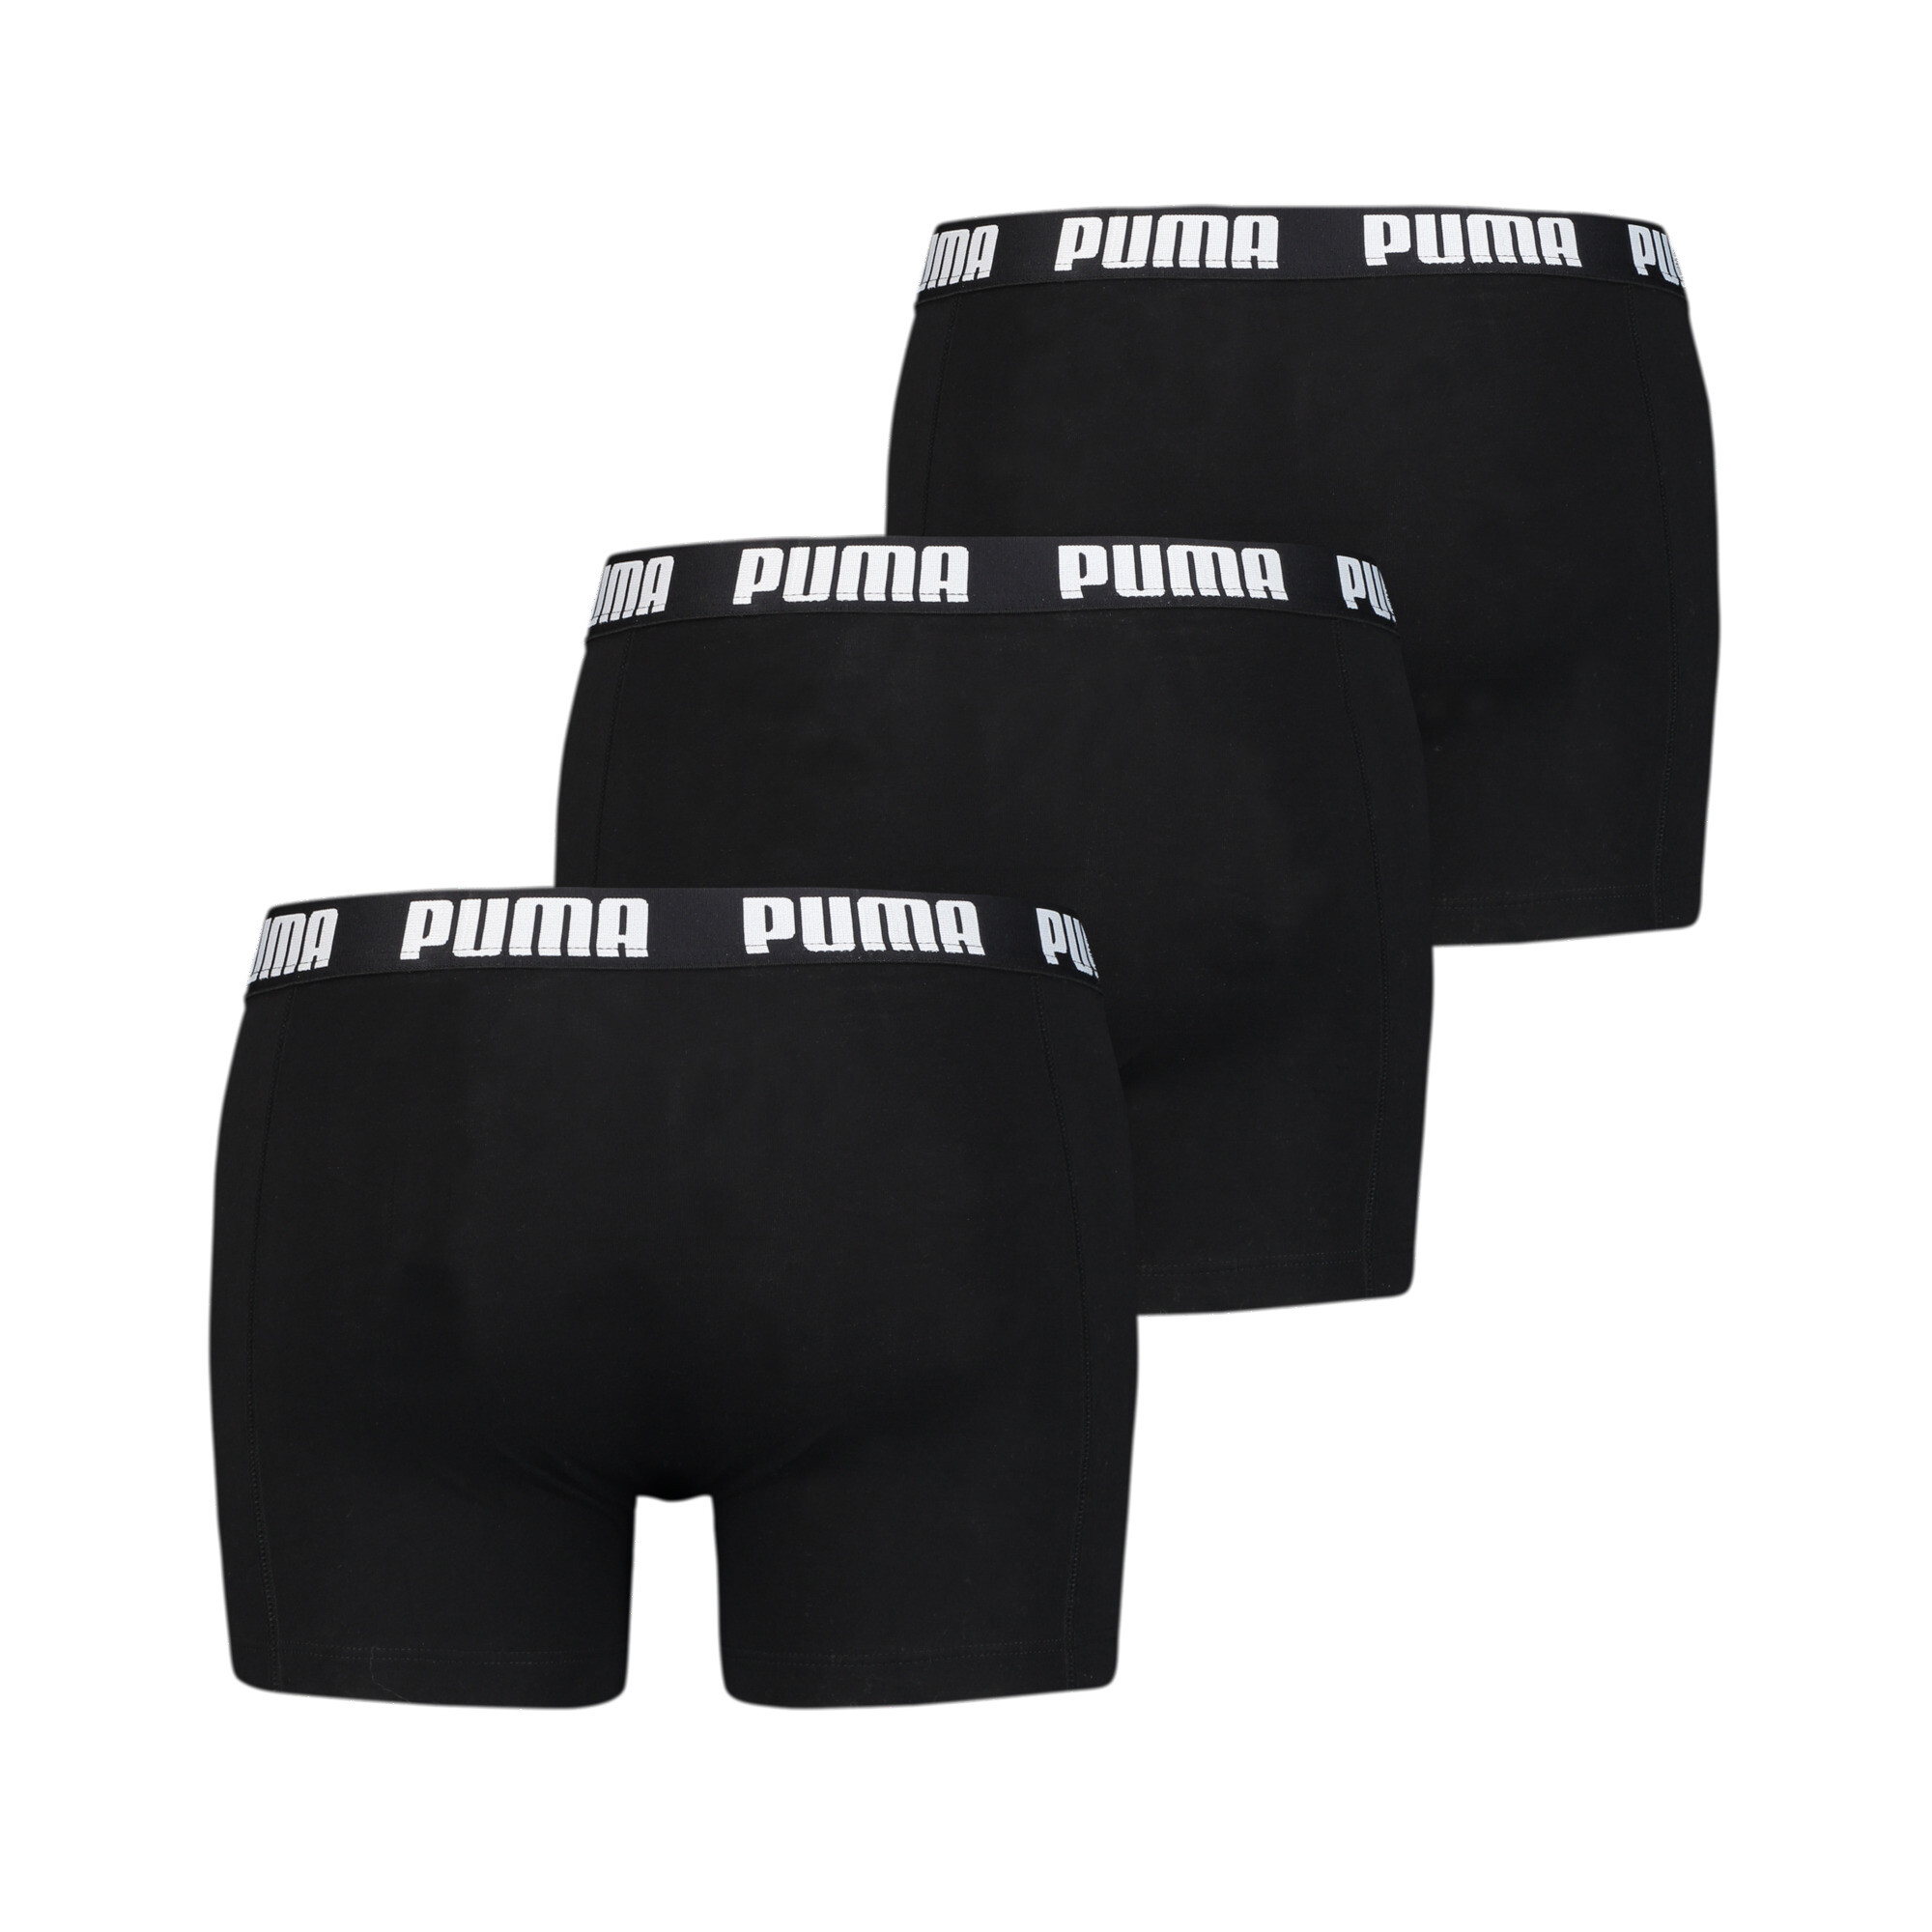 Men's PUMA Everyday Boxers 3 Pack In Black, Size XL